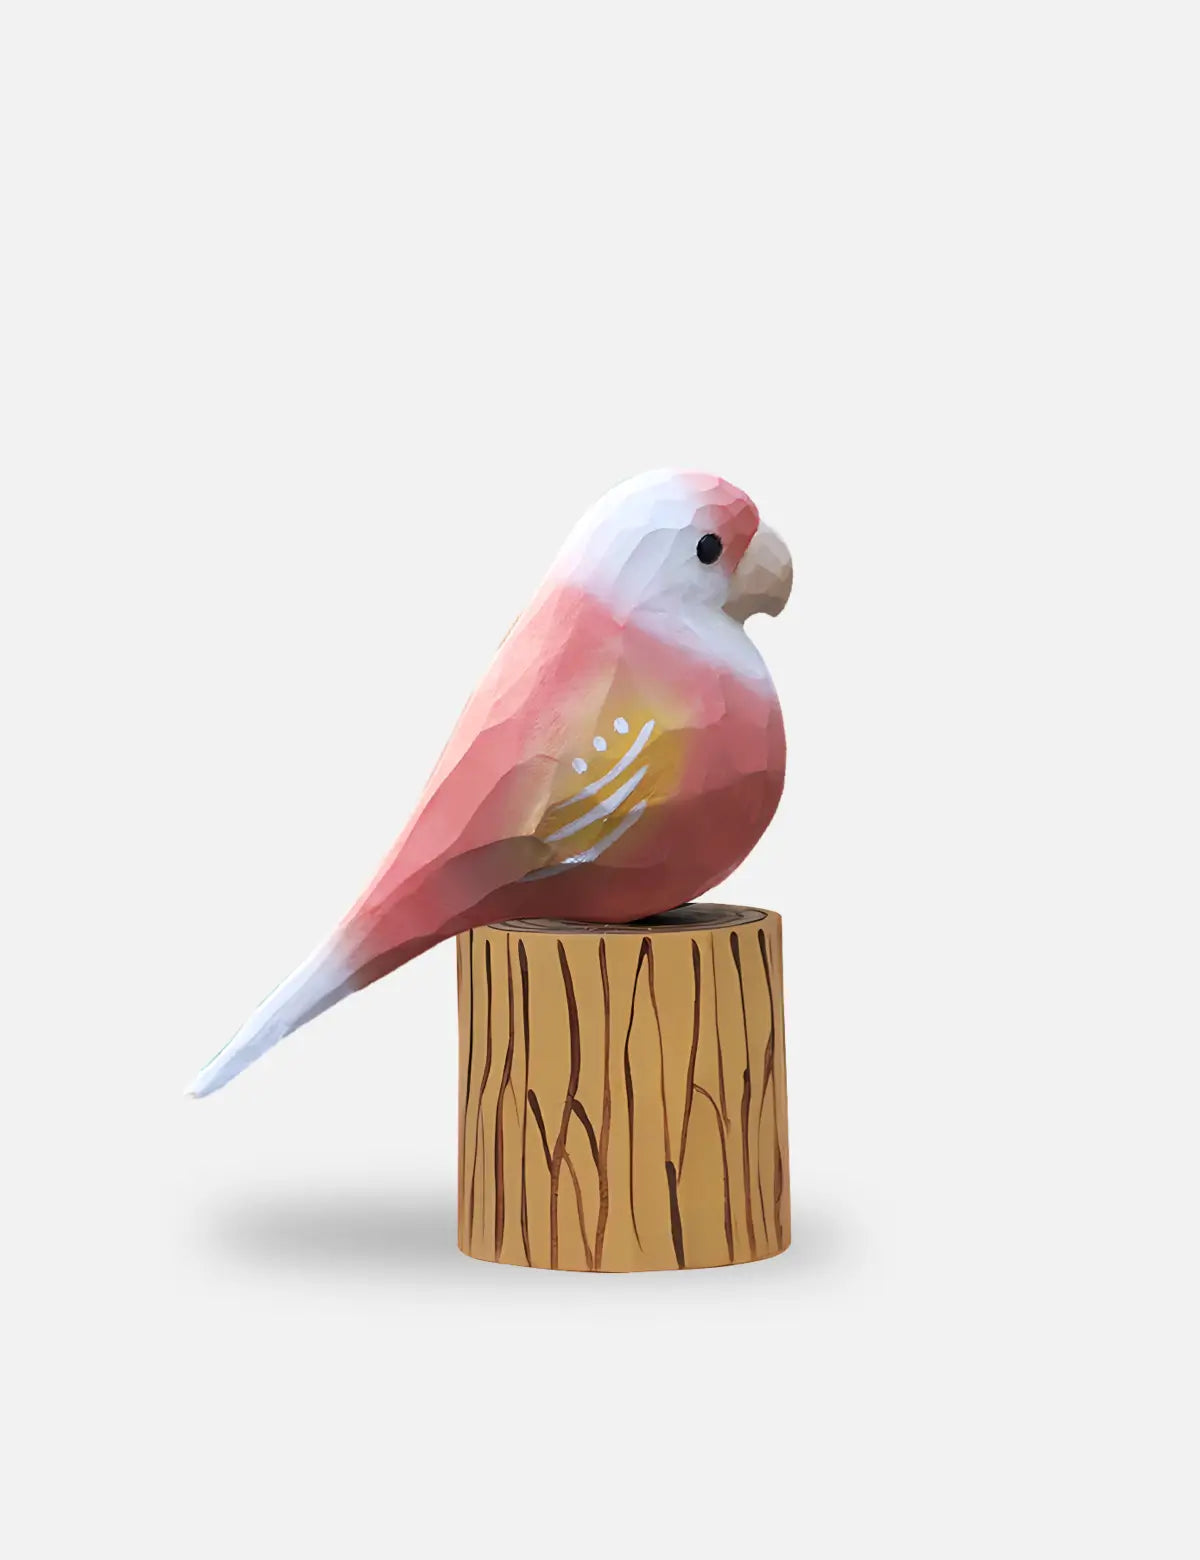 alt="Handcrafted Pink Parakeet Wooden Bird by WoodenWhimsy - Exquisite Home Ornament" - 01